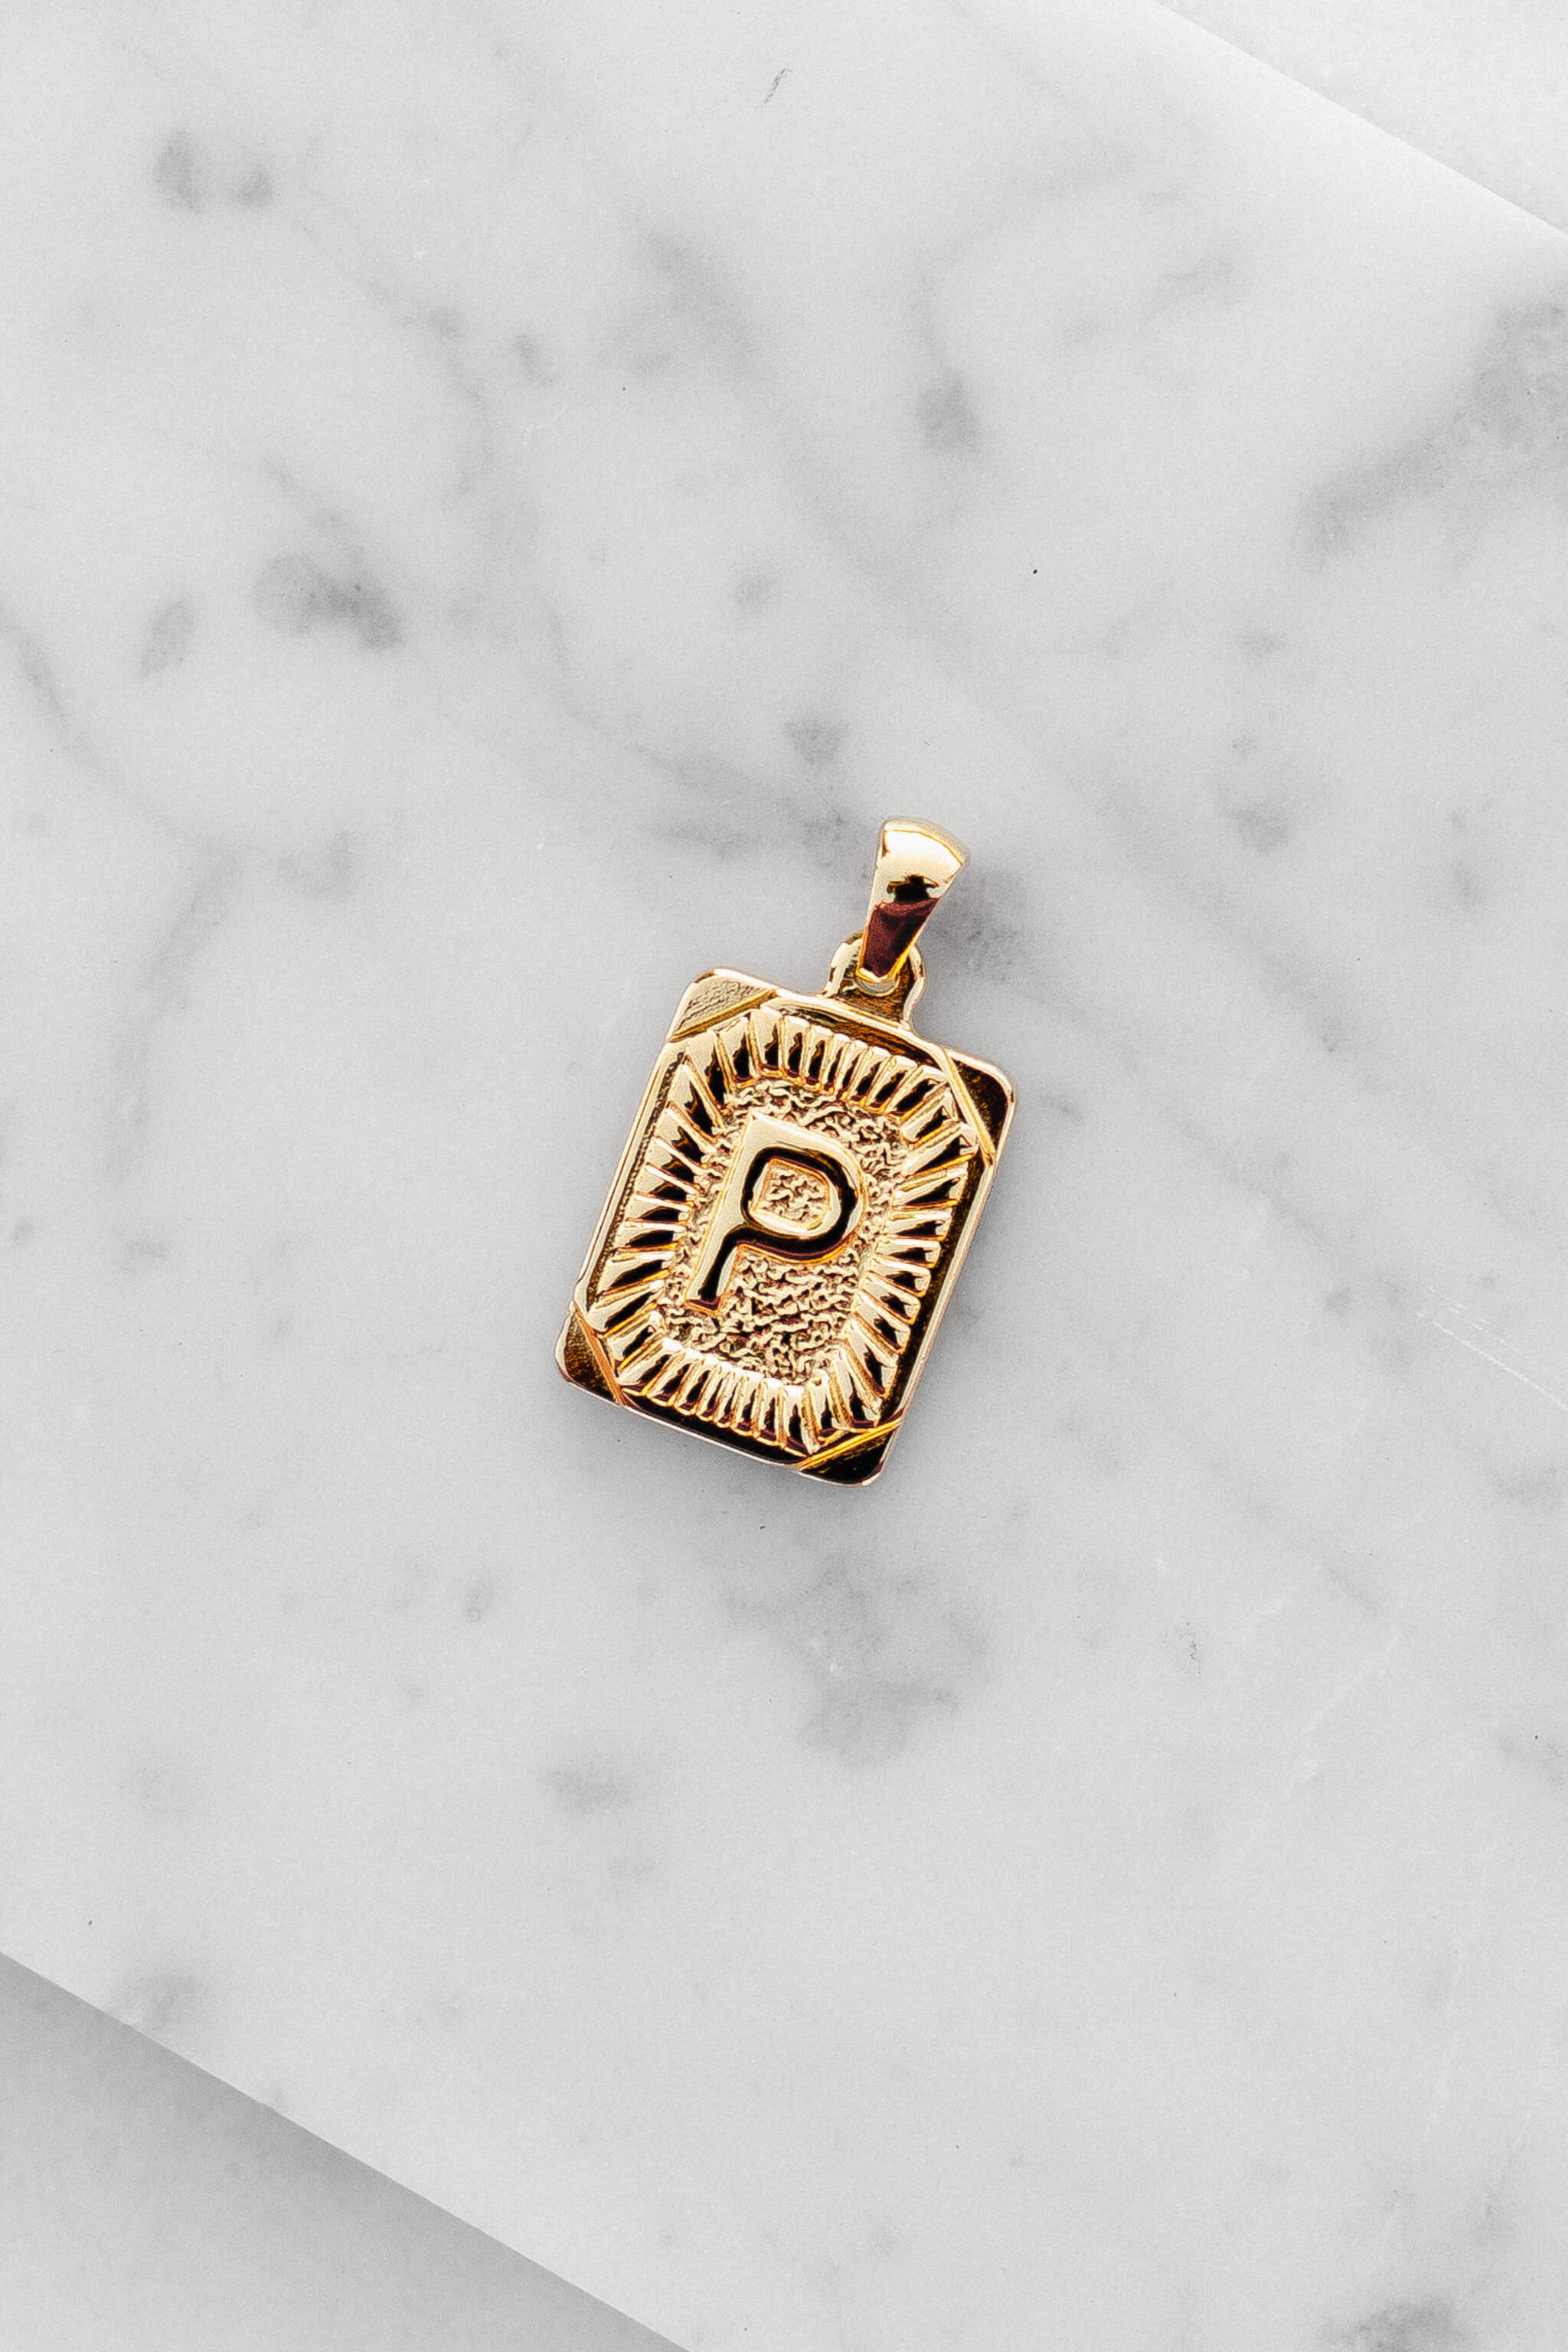 Gold Monogram Letter "P" Charm laying on a marble